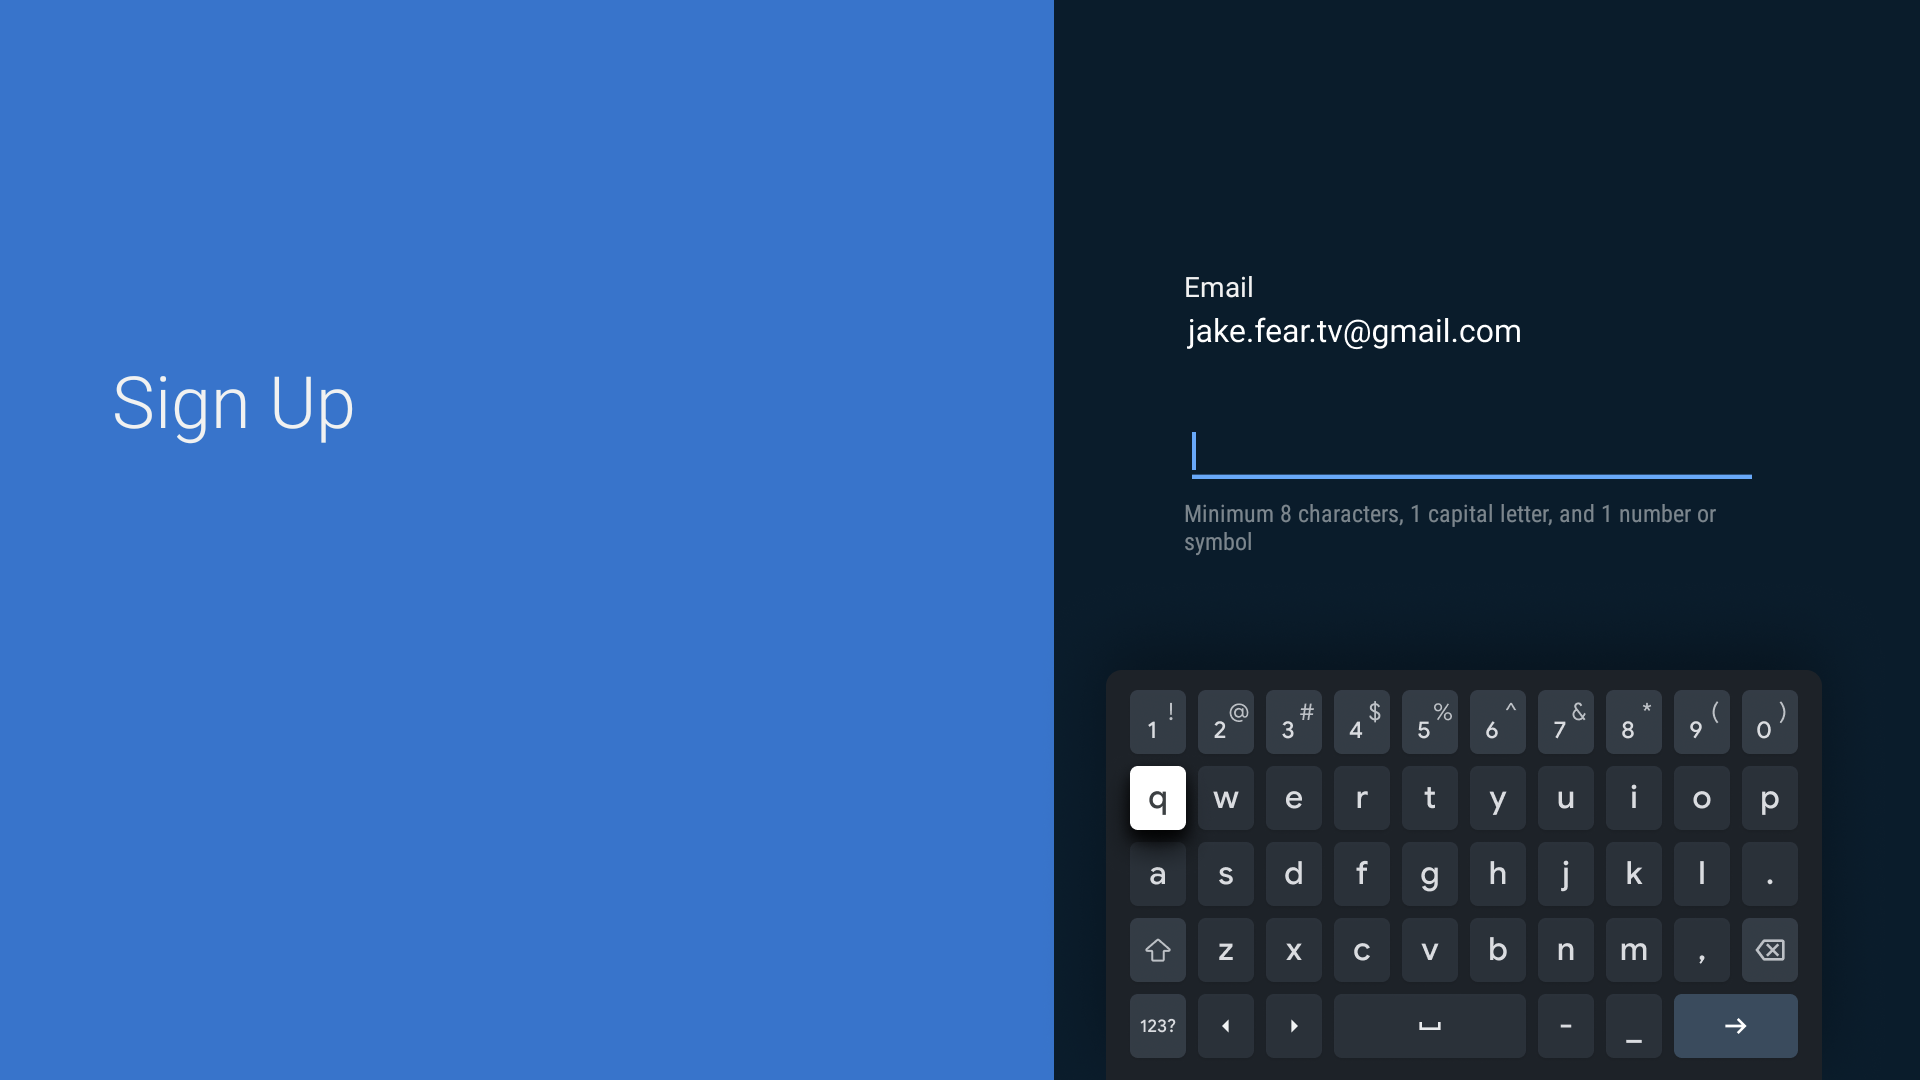 Example alignment of Gboard